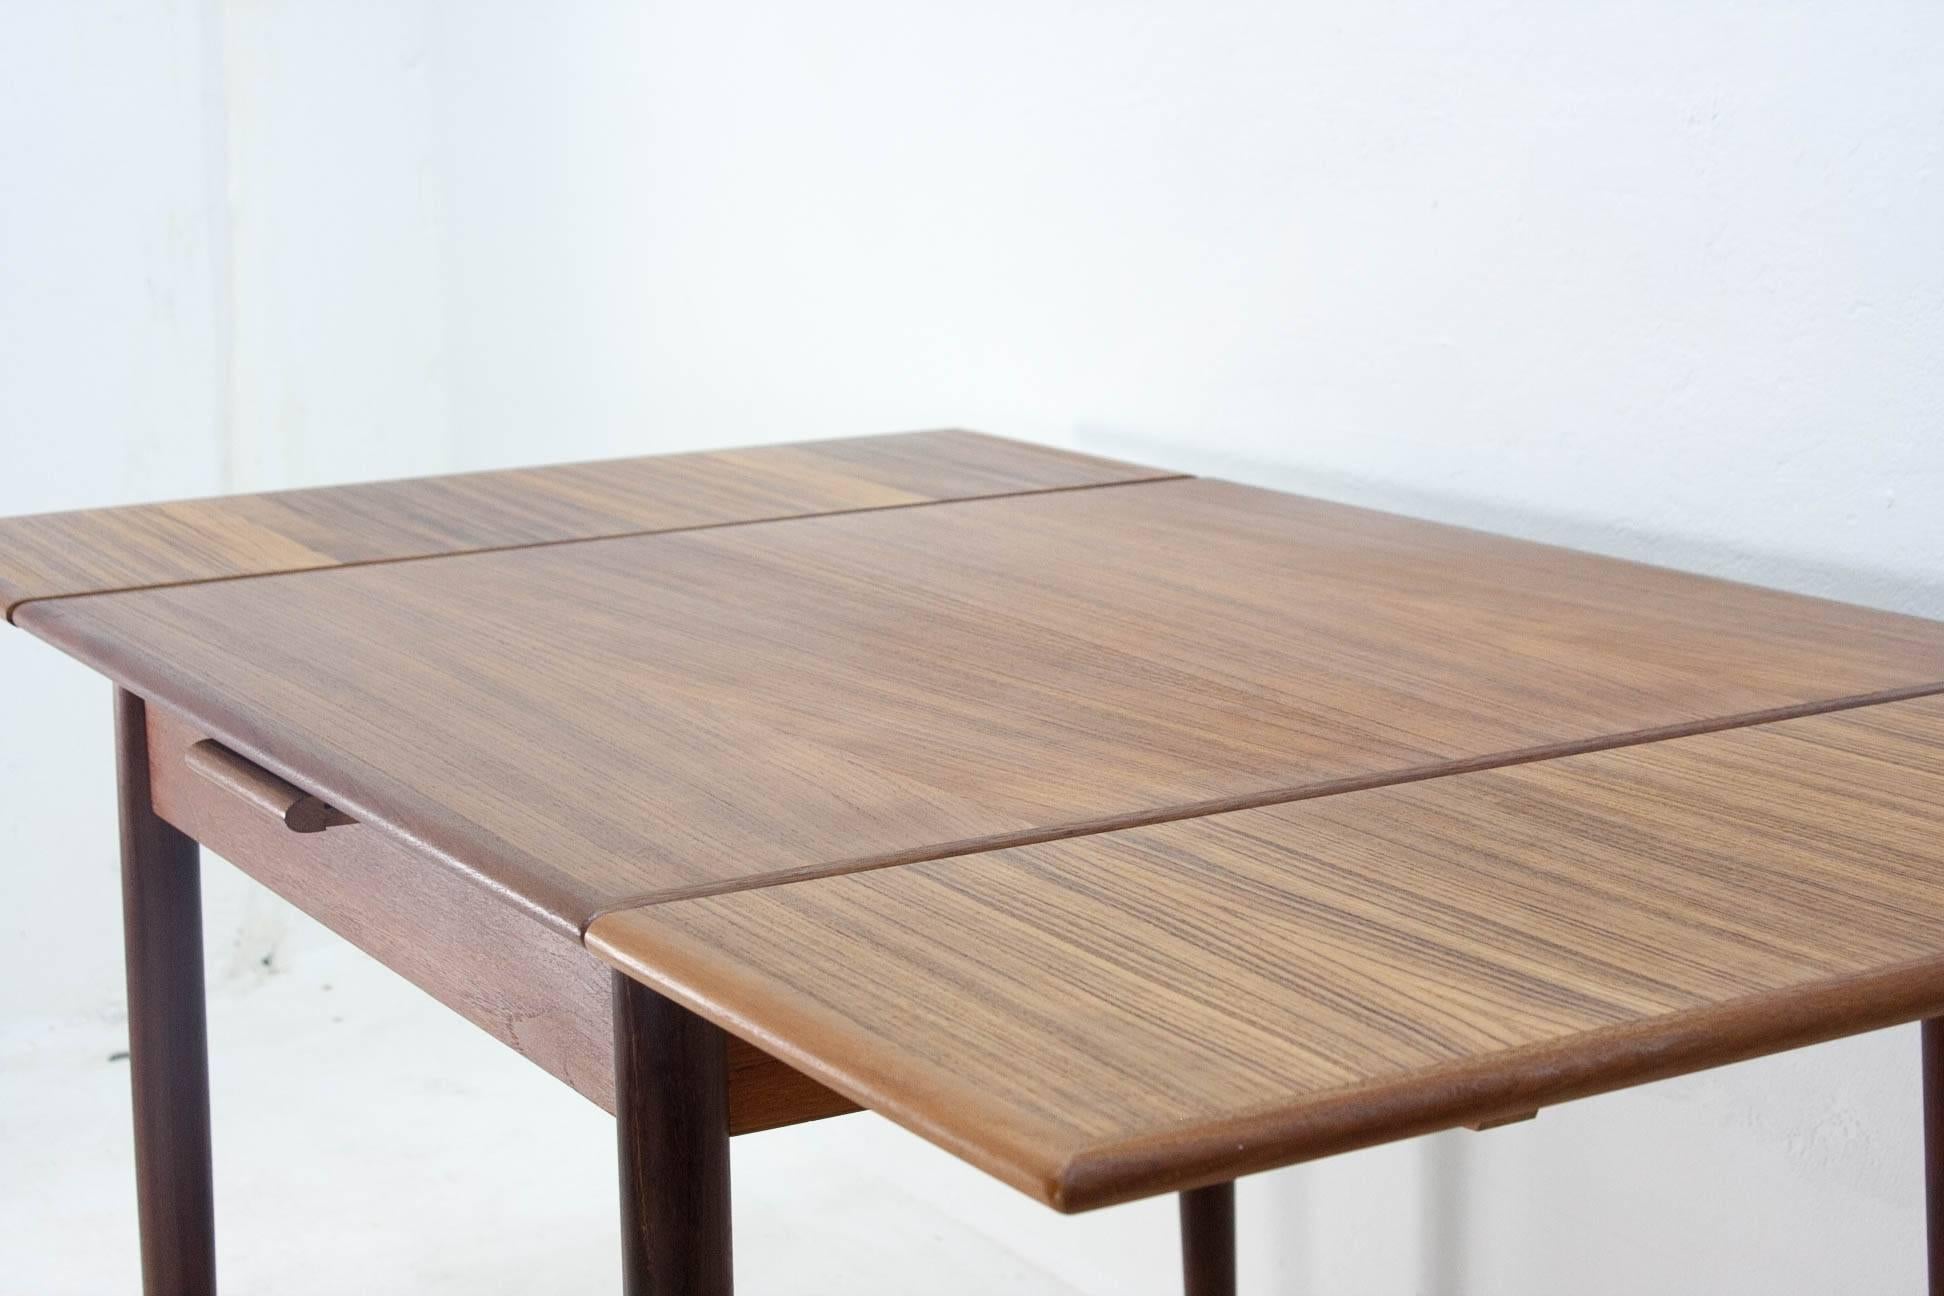 Beautiful Scandinavian extendable dining table from the 1960s. This walnut table is in excellent condition and extends on two sides. The legs are detachable for storage or transport.